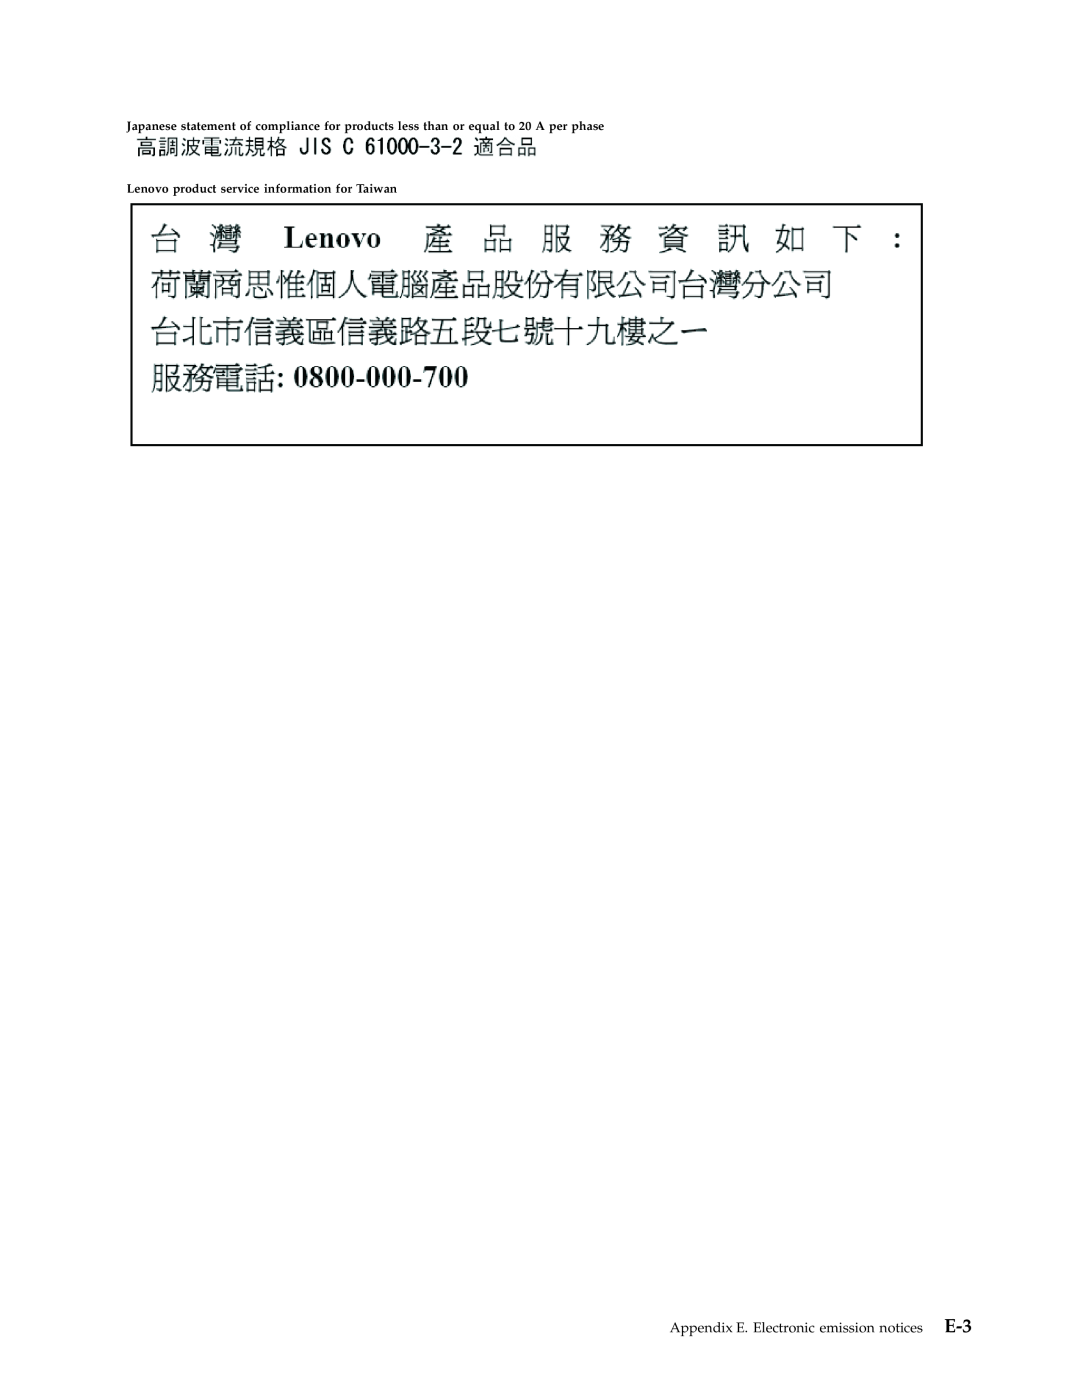 Lenovo 43N3224 manual Appendix E. Electronic emission notices E-3, Lenovo product service information for Taiwan 